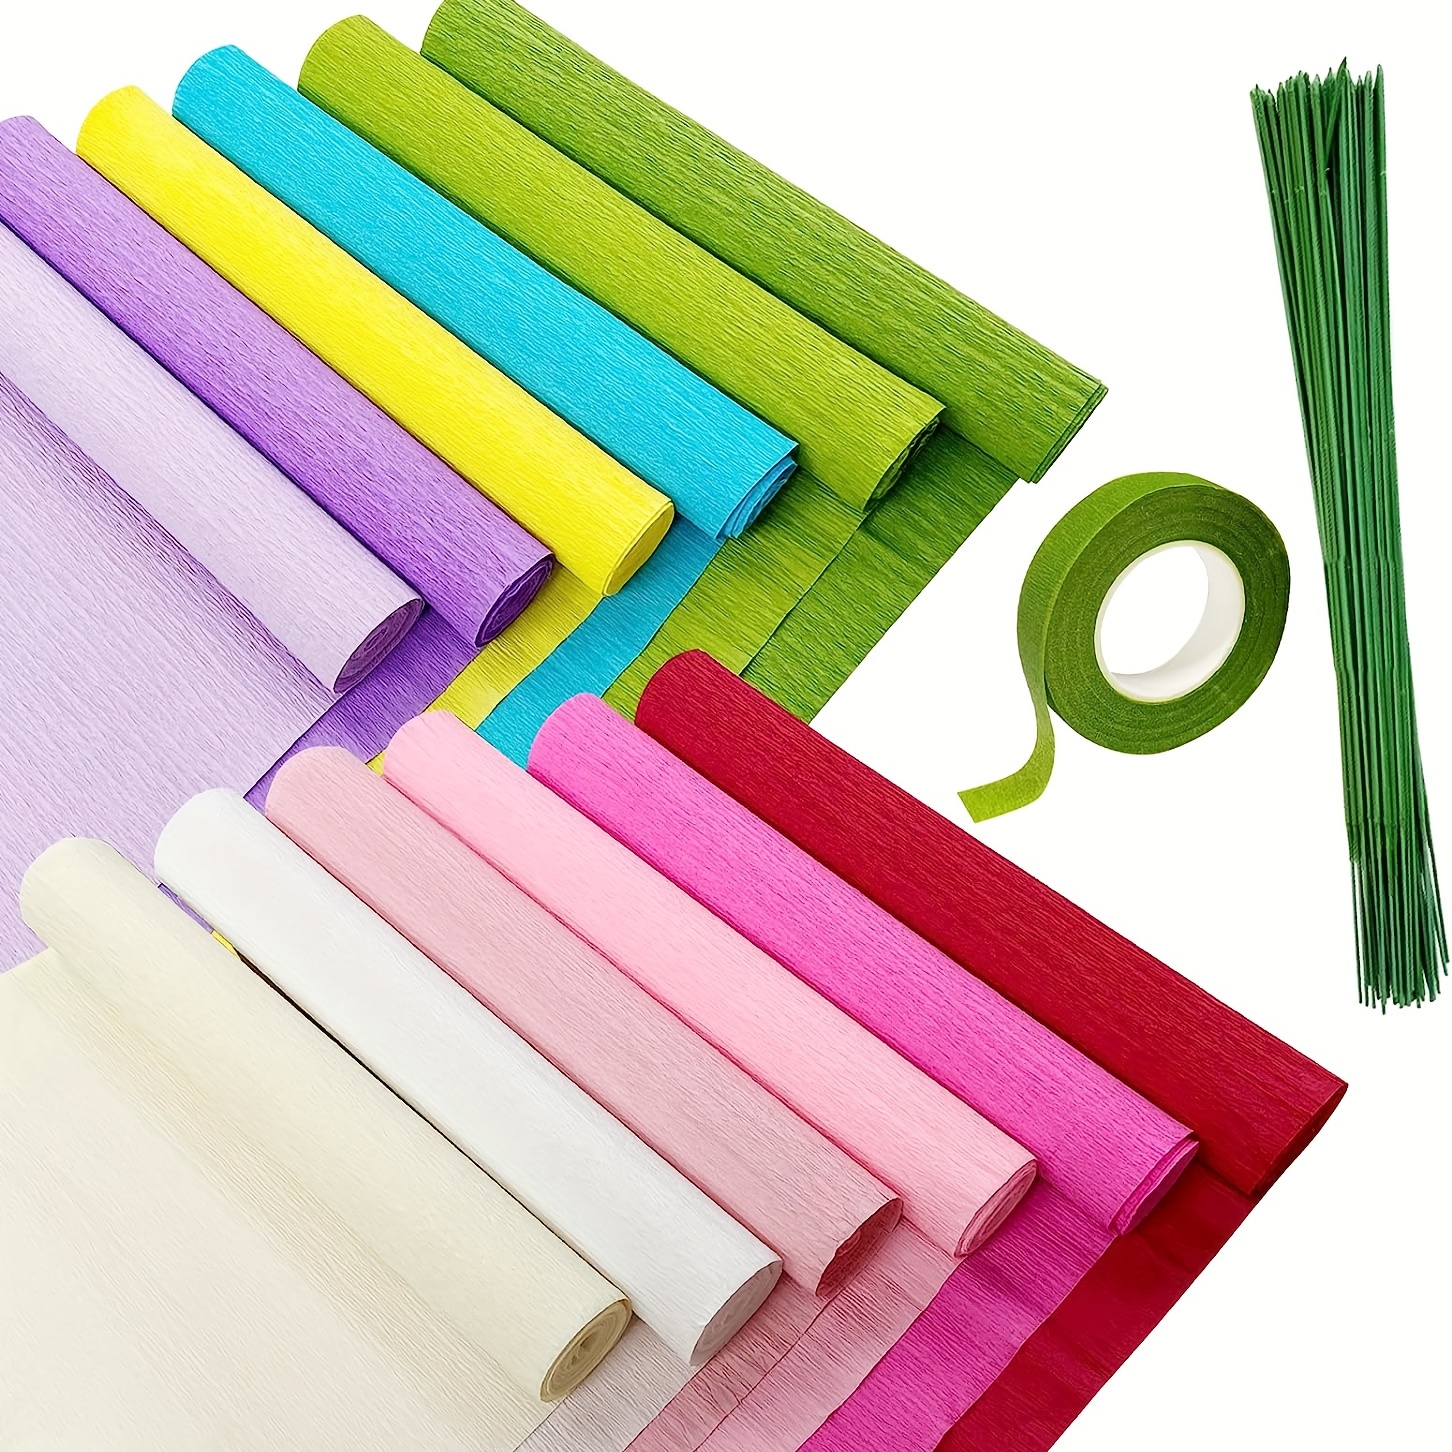 Fairnull Crepe Paper Sheets Rolls Crepe Paper Streamer 103 Pcs Floral  Arrangement Kit Green Floral Tape Floral Wire Stems Wire Cutter for Wreath Flower  Making Supplies(Pink) 